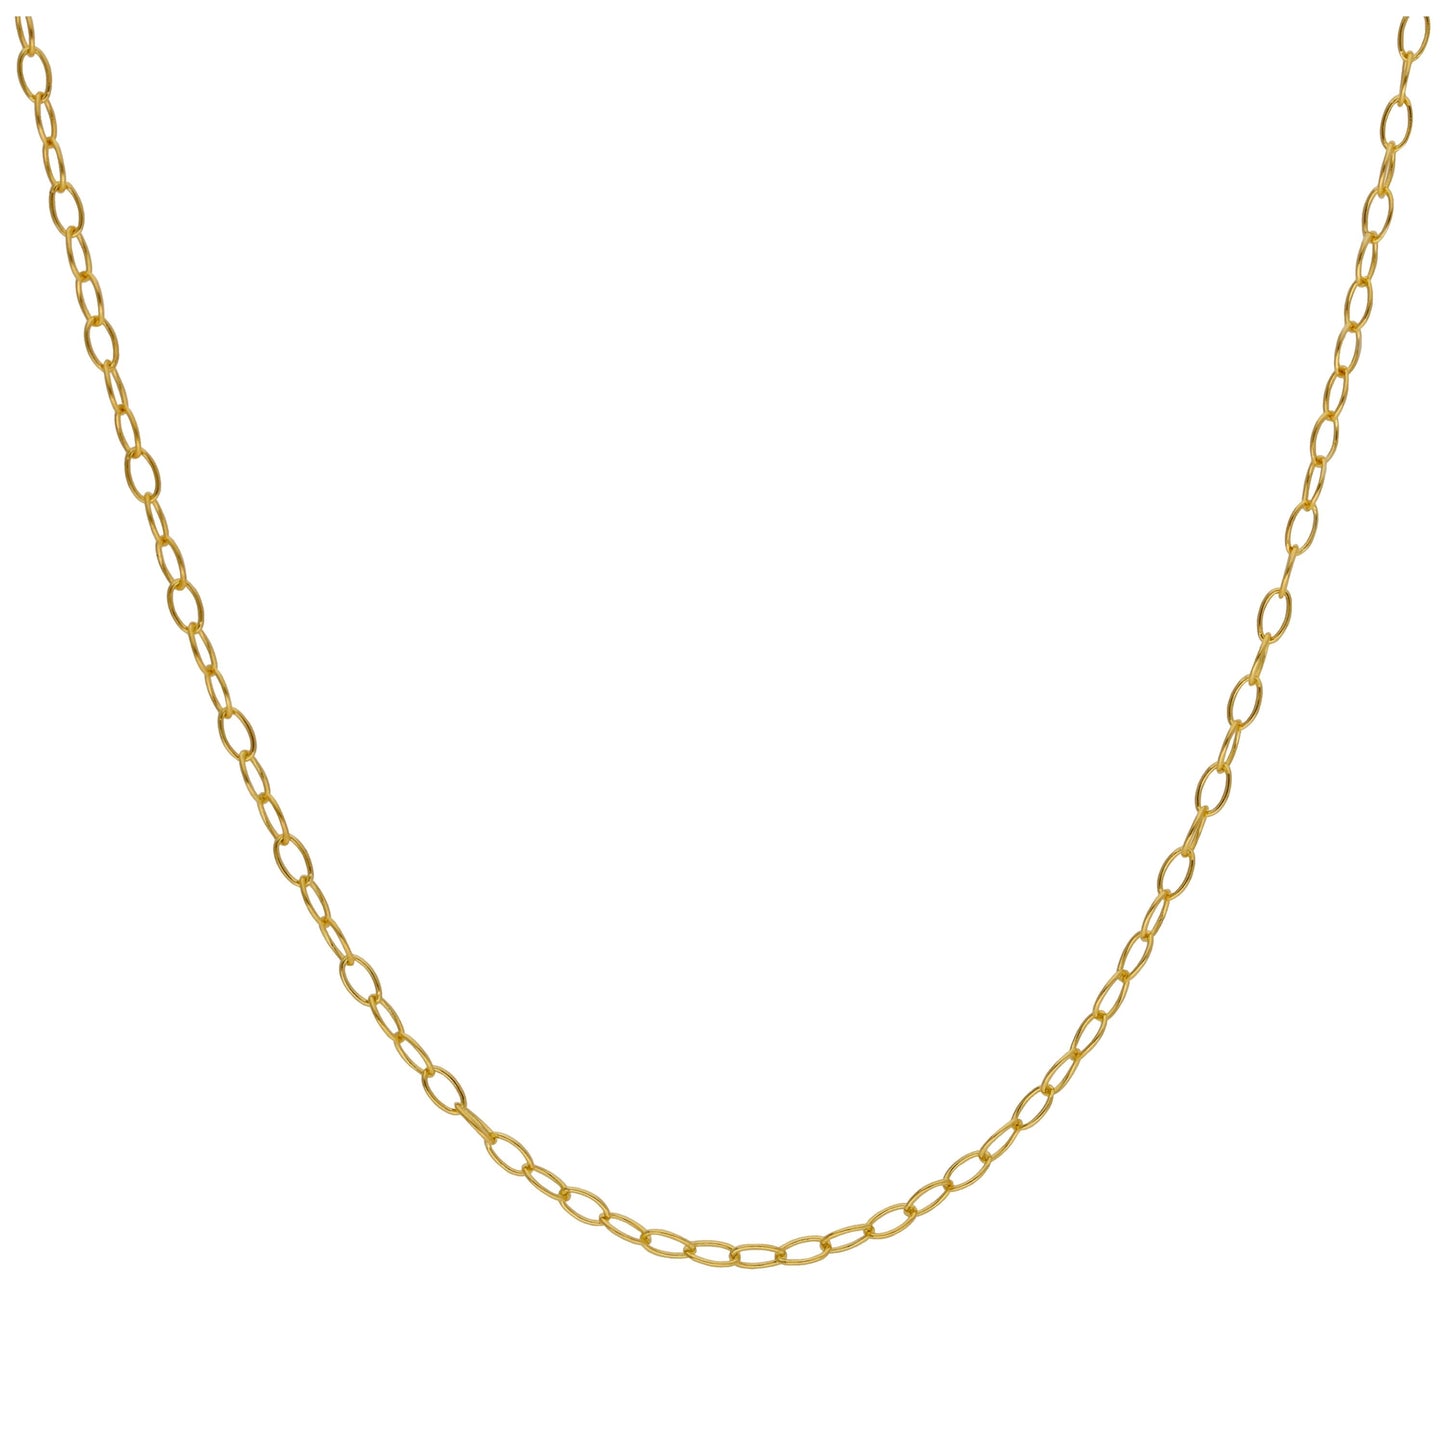 Gold Plated Sterling Silver Trace Chain 14 - 22 inches